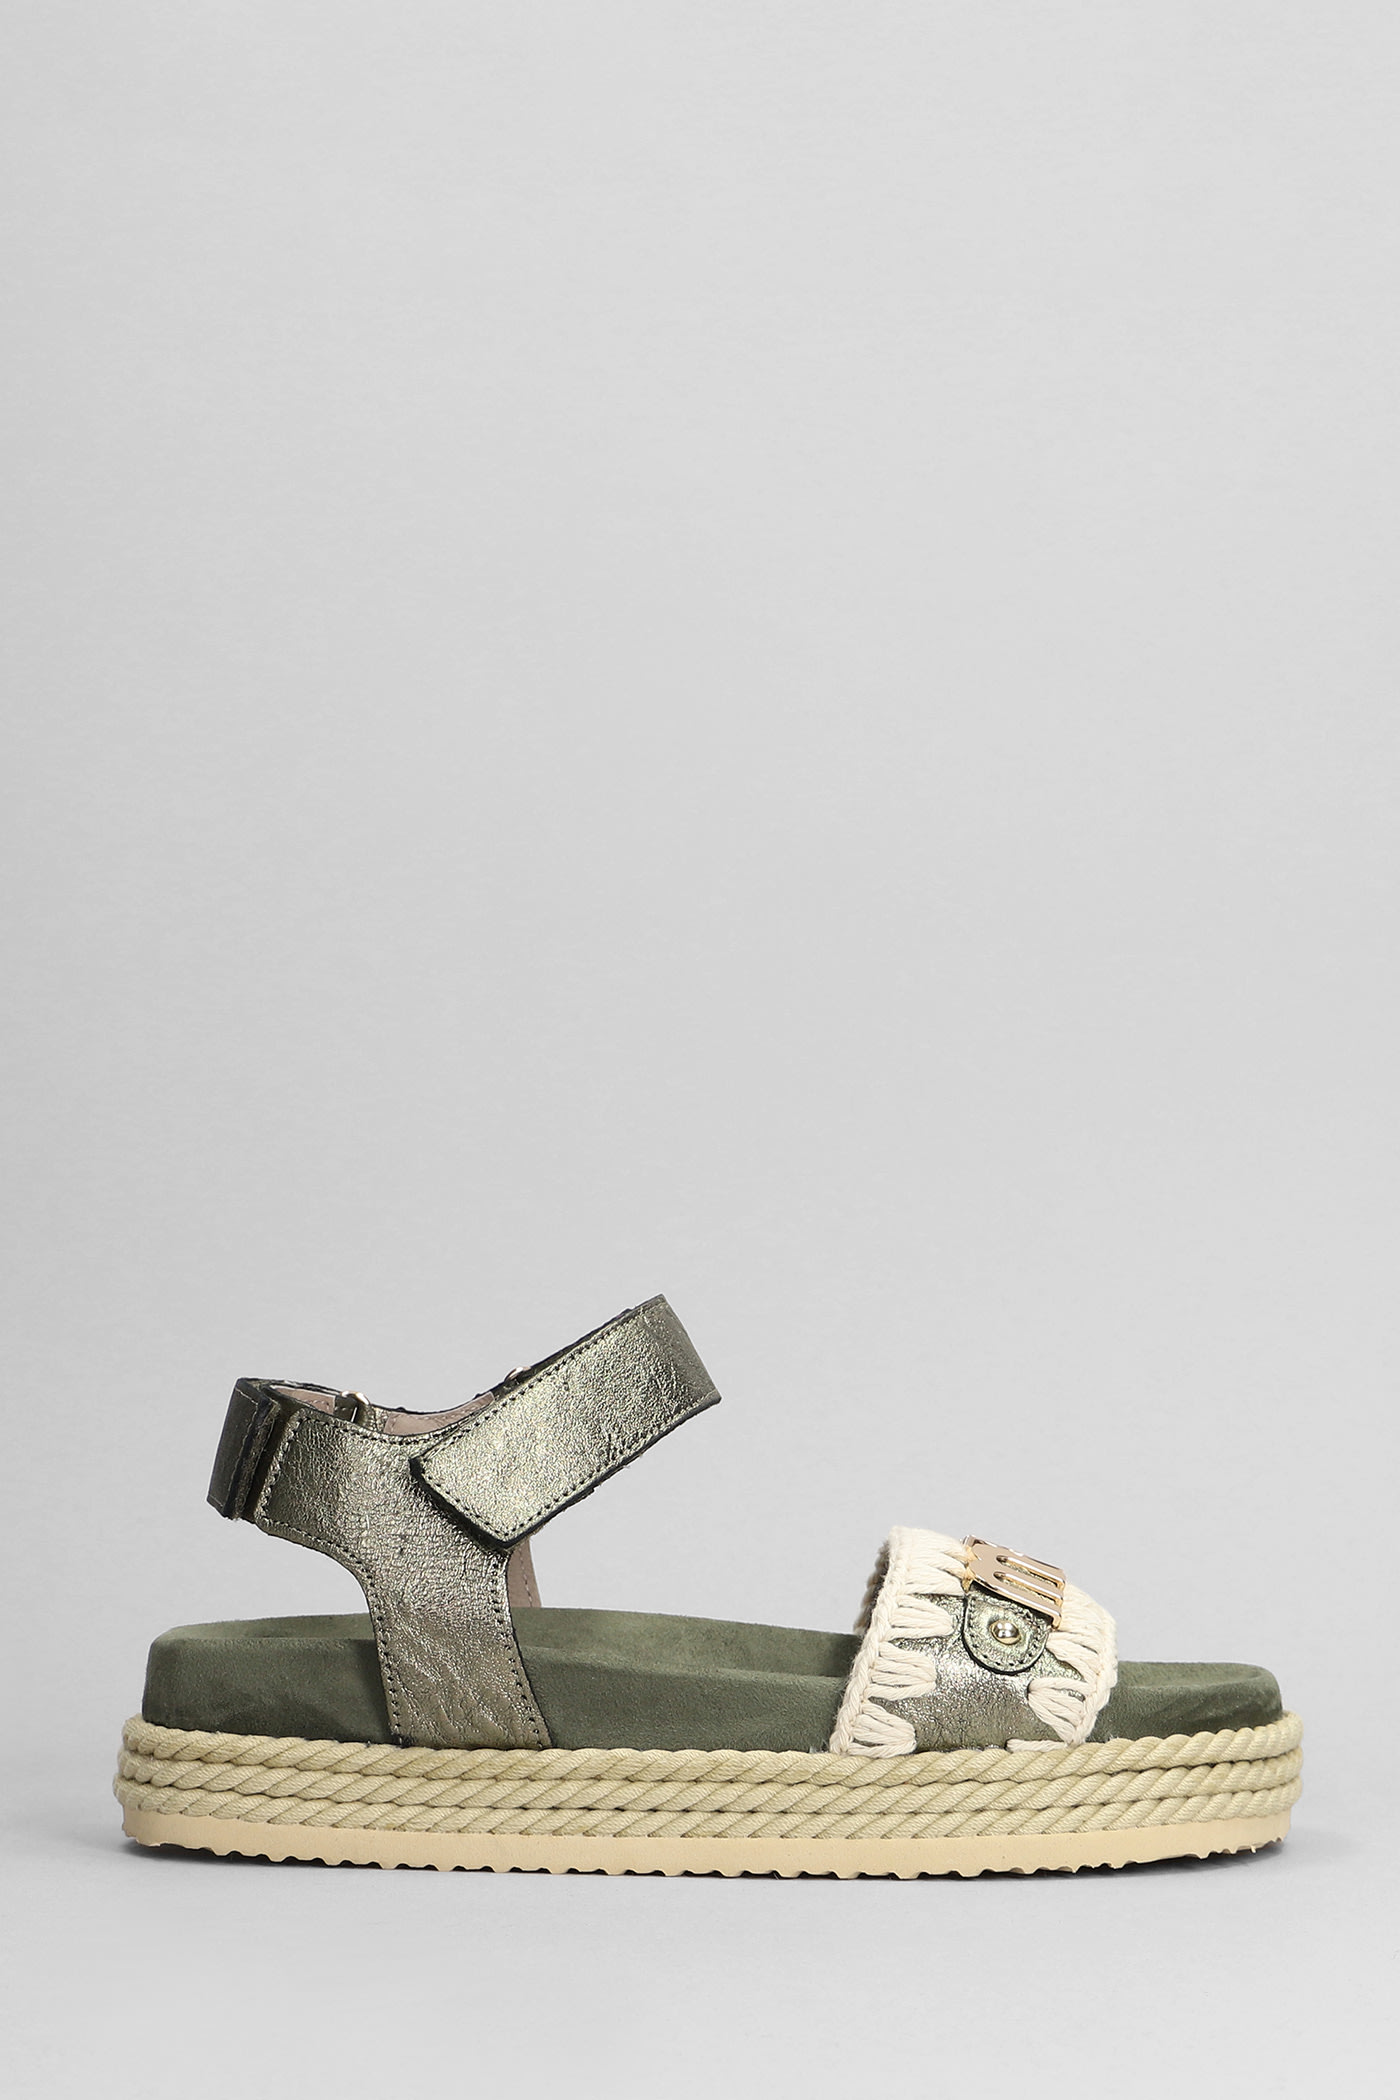 MOU ROPE BIO SANDAL FLATS IN GREEN SUEDE AND LEATHER